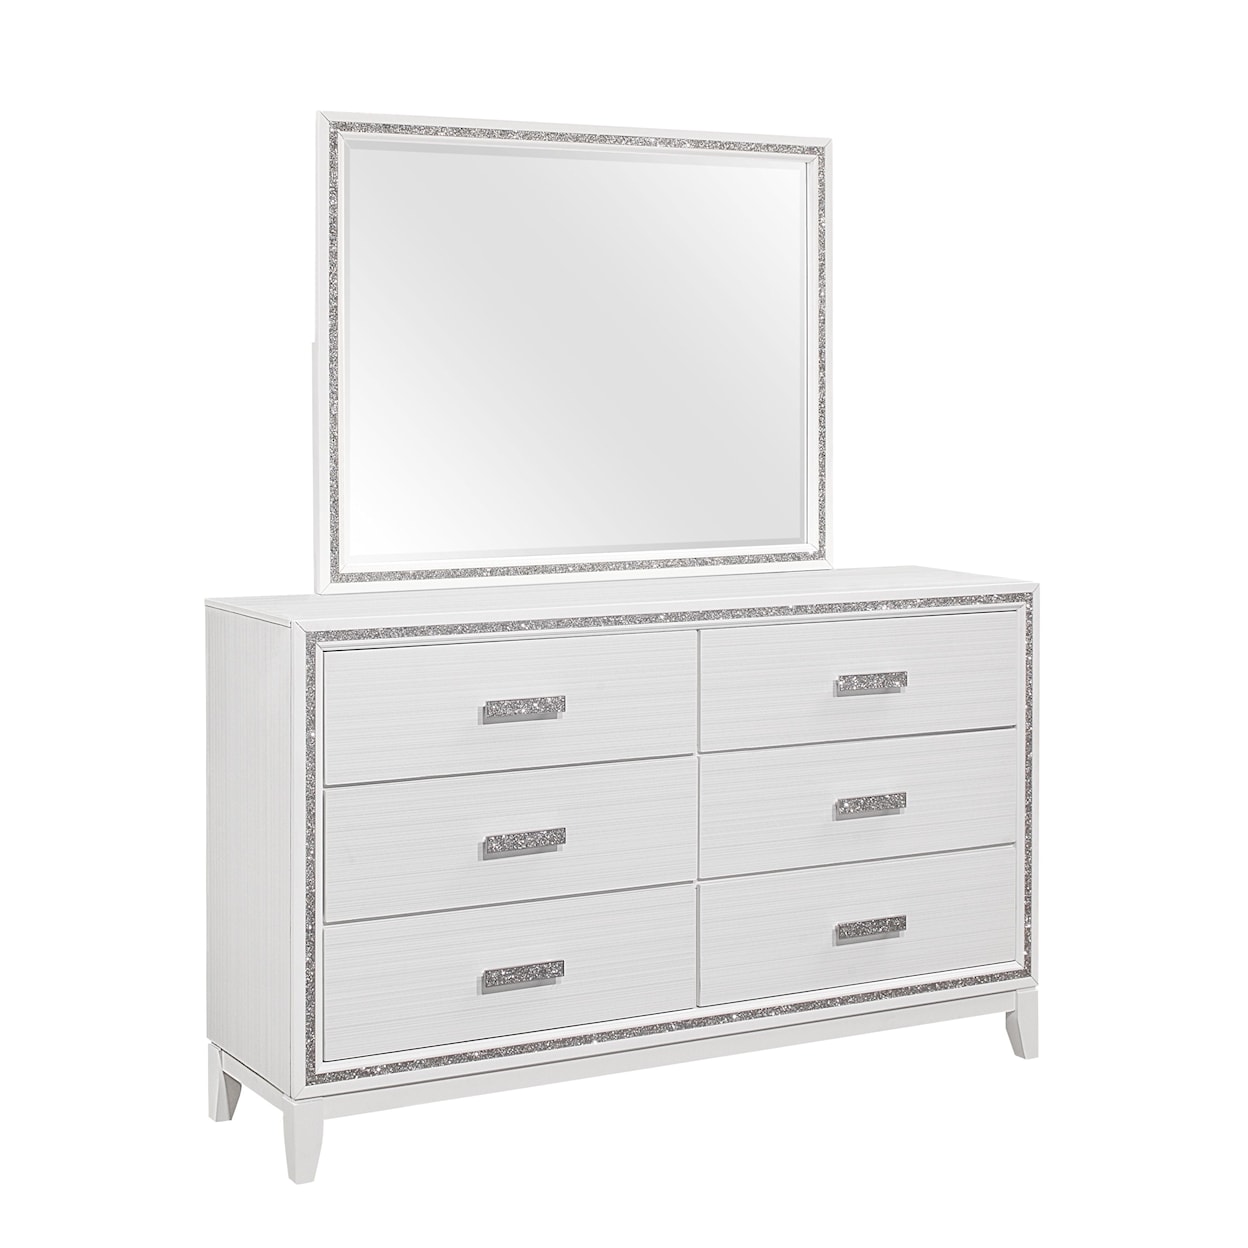 Global Furniture Lily White 6-Drawer Dresser with Glittered Trim